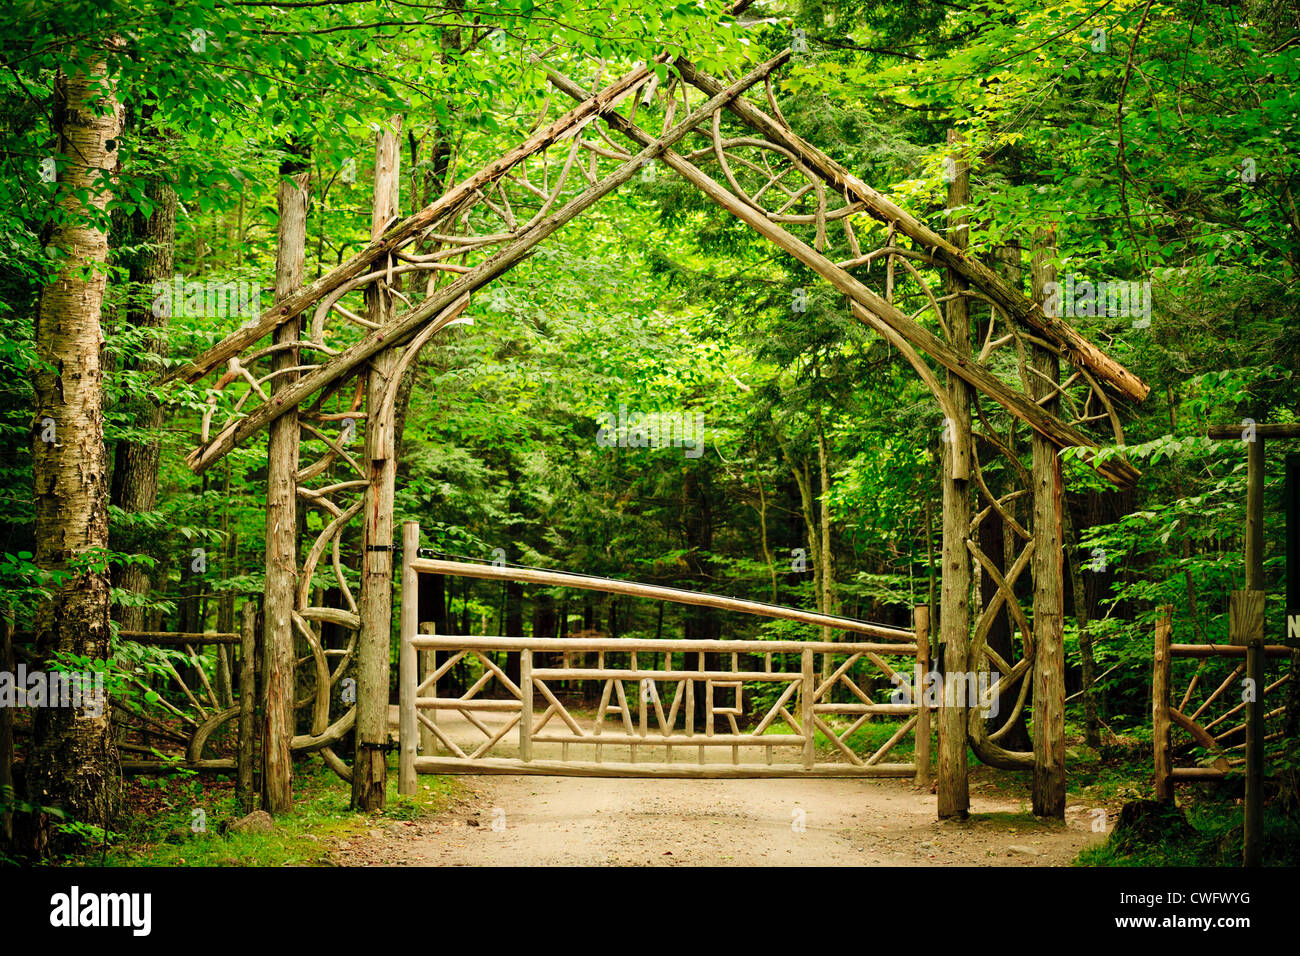 Rustic gate marks beginning of Adirondack Mountain Reserve in High Peaks region New York State Stock Photo